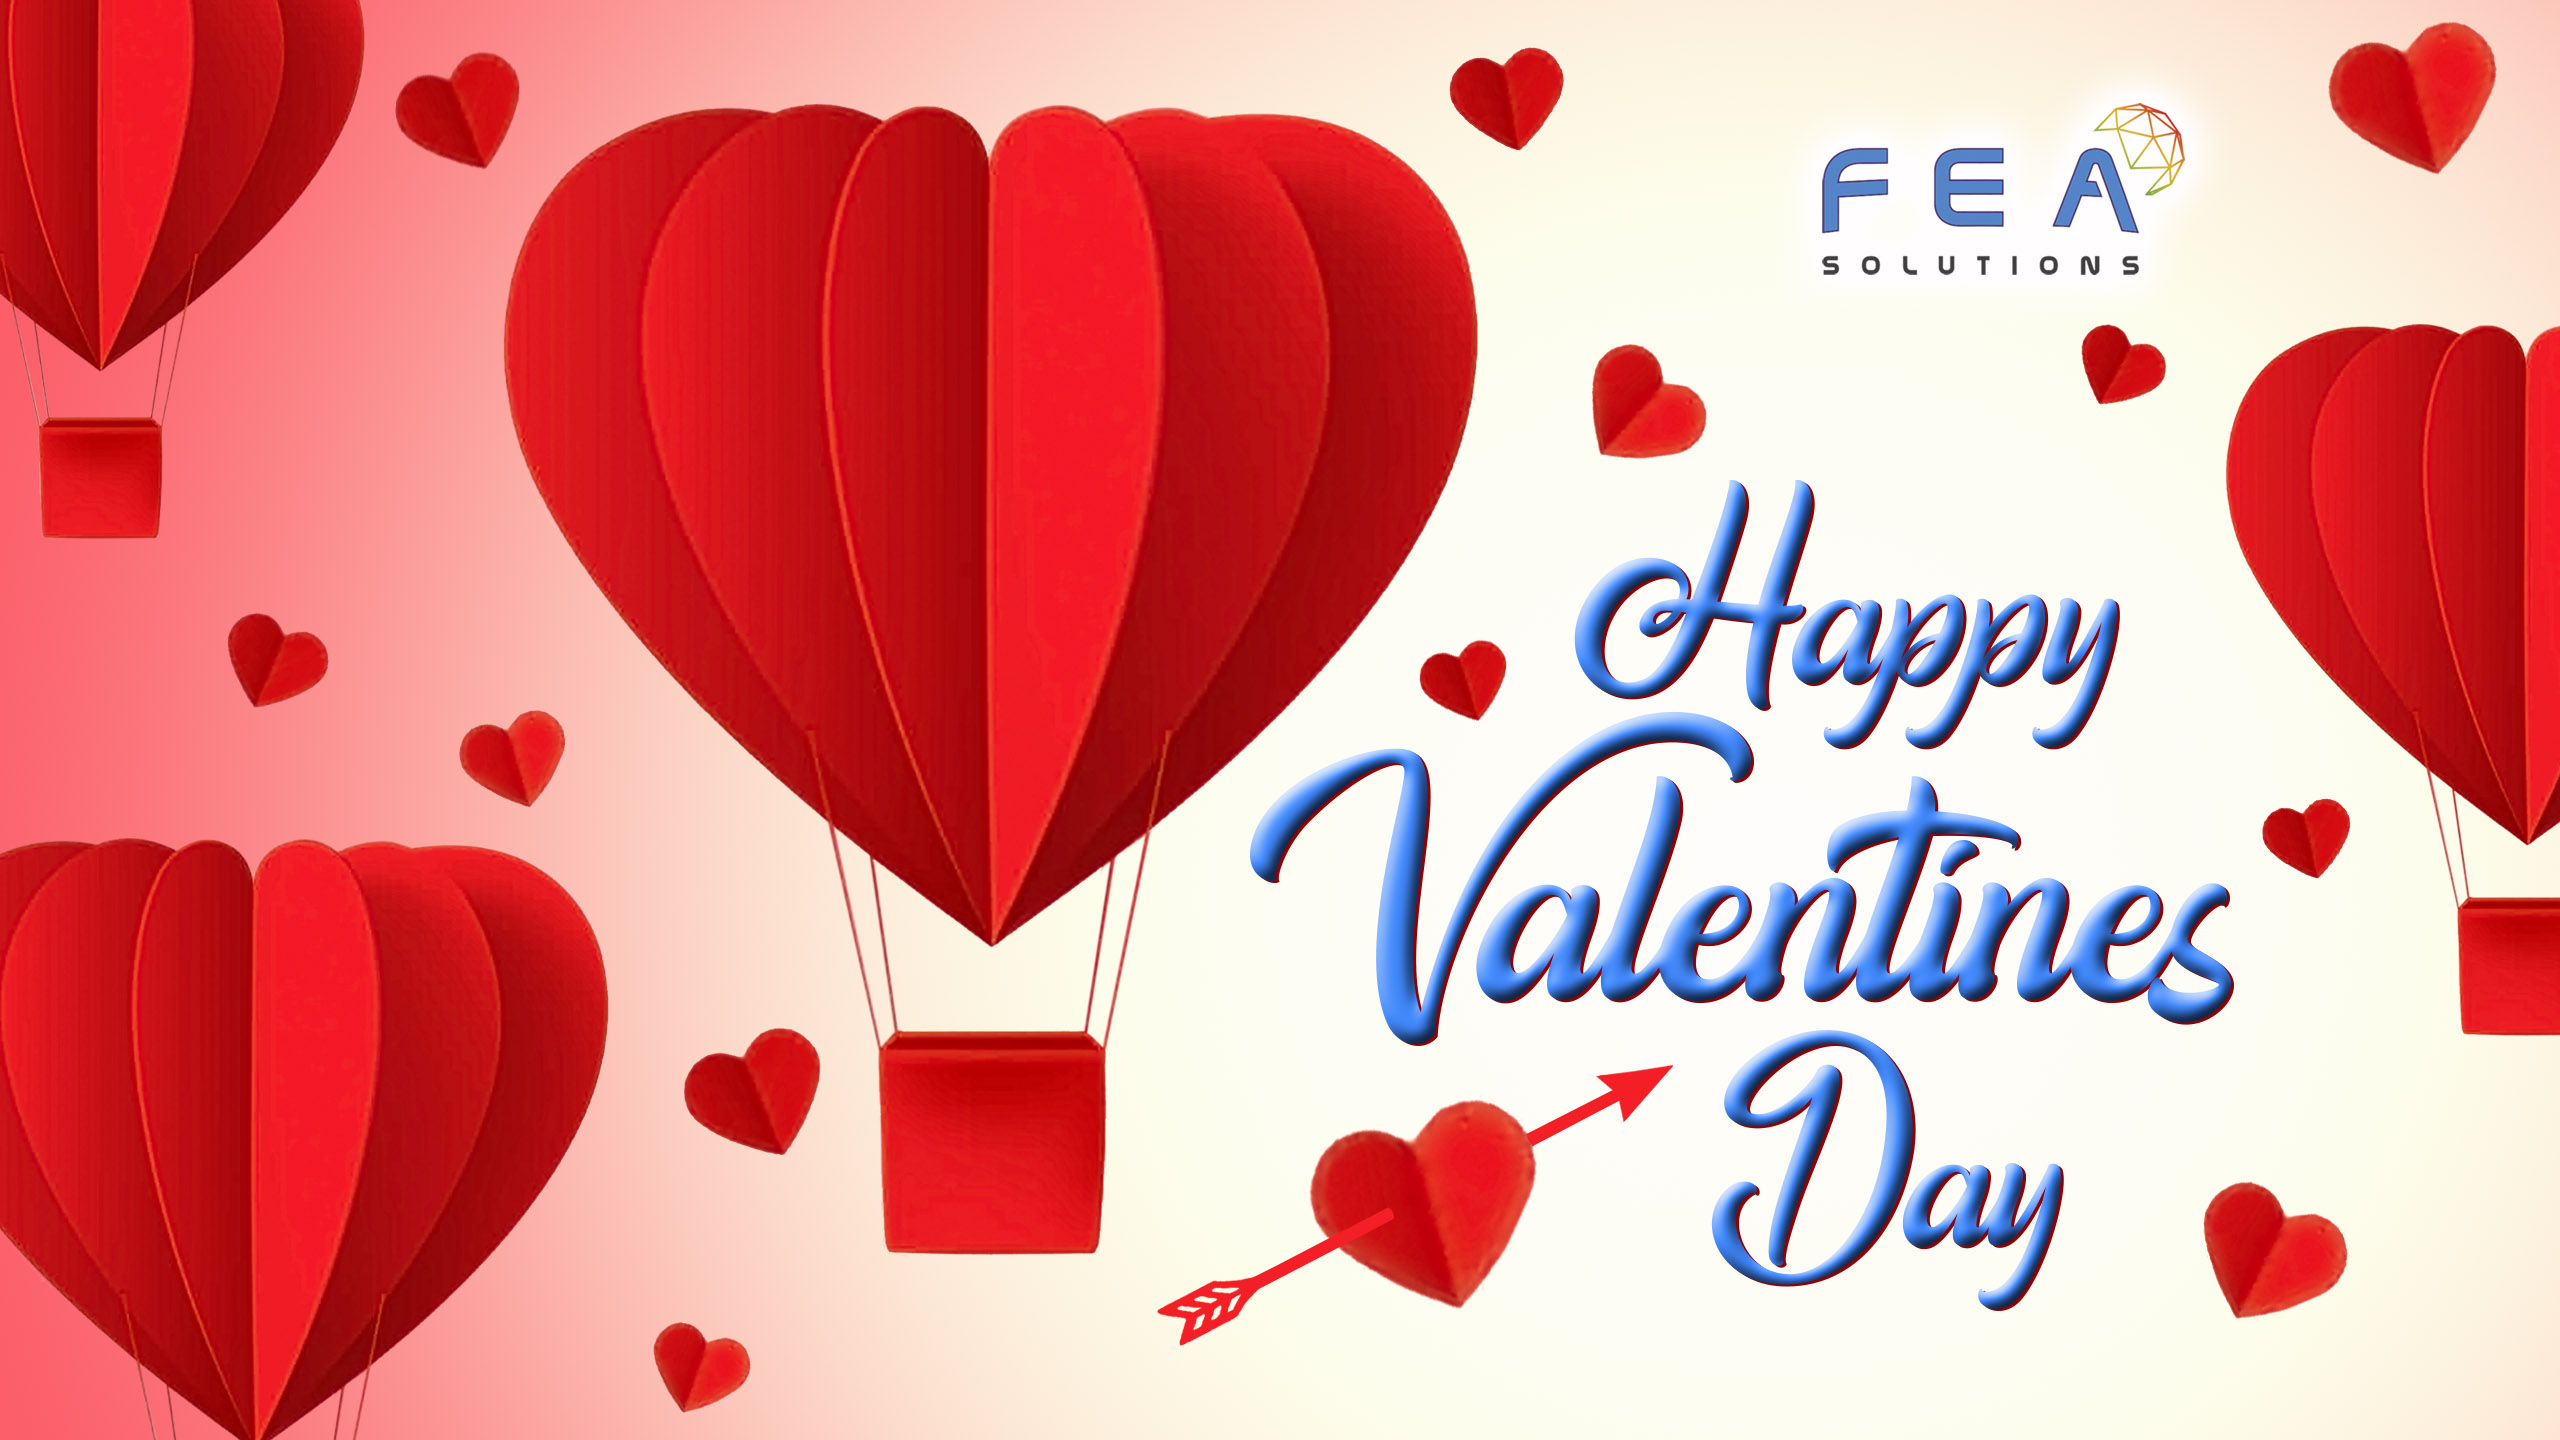 valentines day message from fea solutions